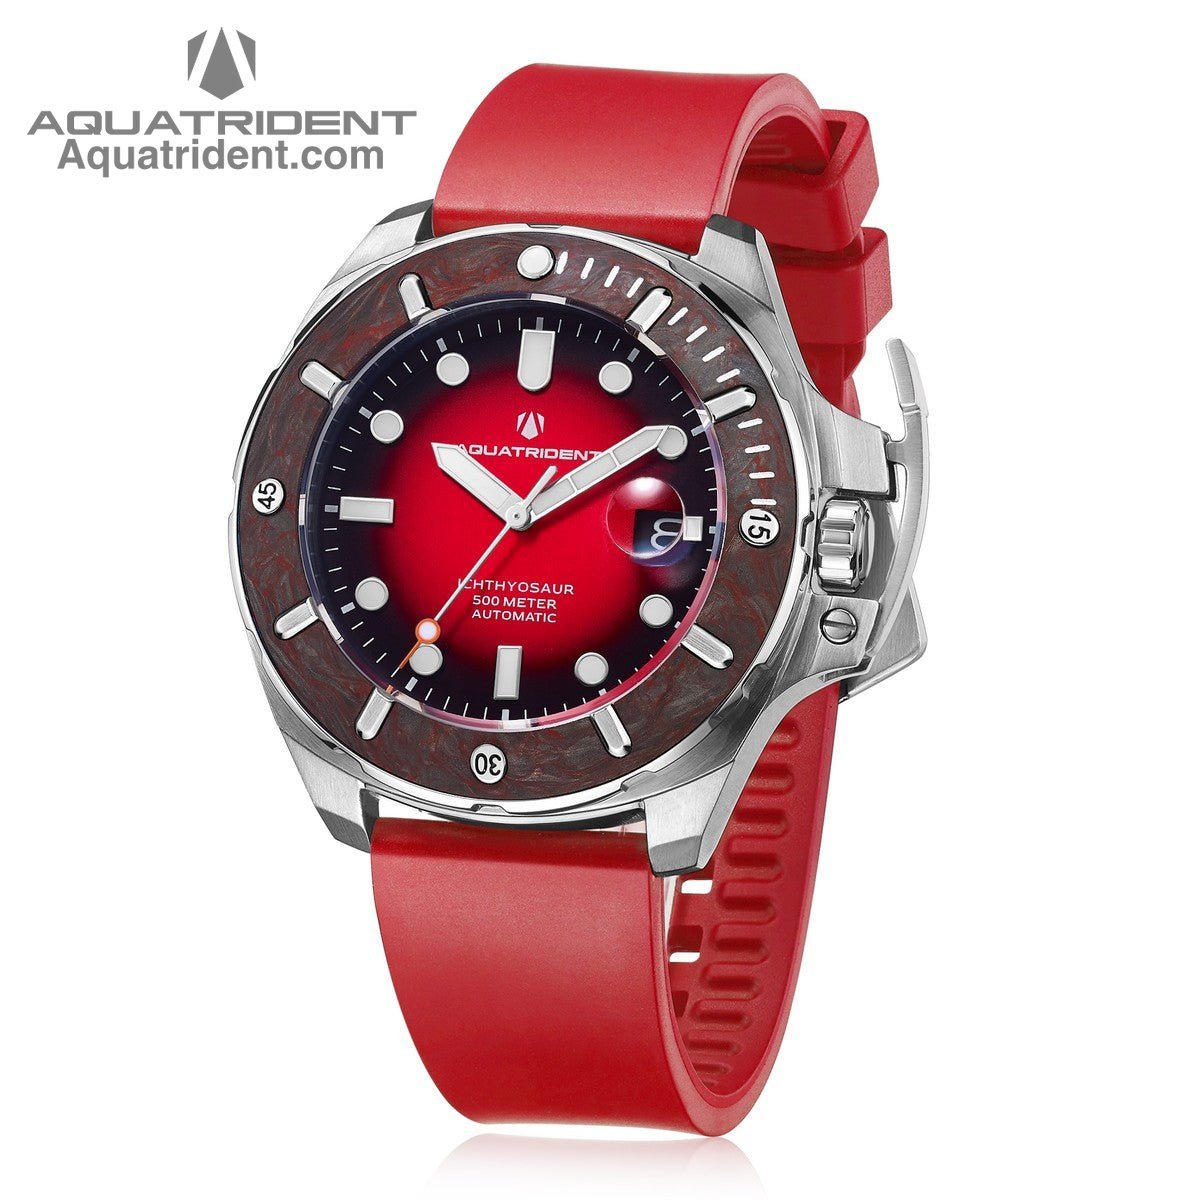 steel case-grey red marbled carbon fiber bezel-black and red dail-red fluororubber strap-watch